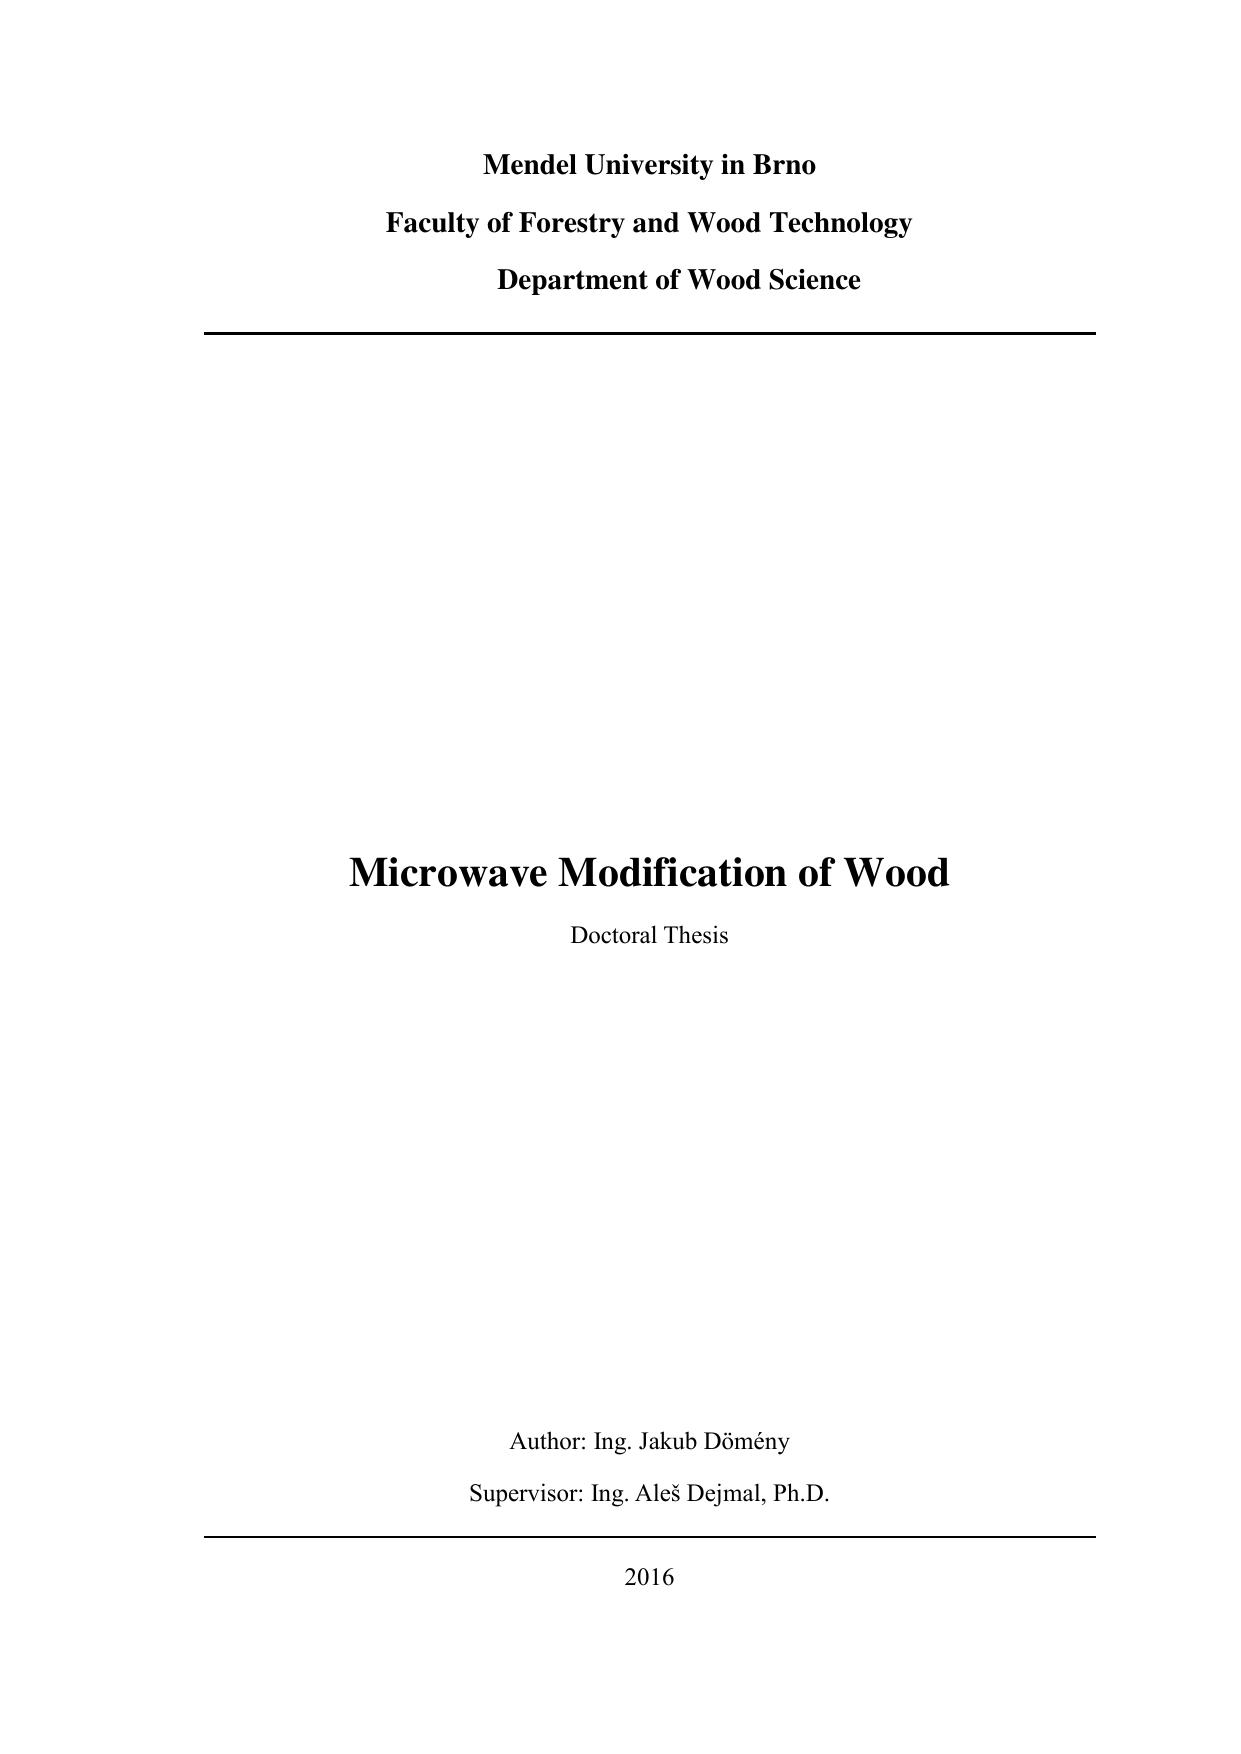 Microwave Modification of Wood  2016